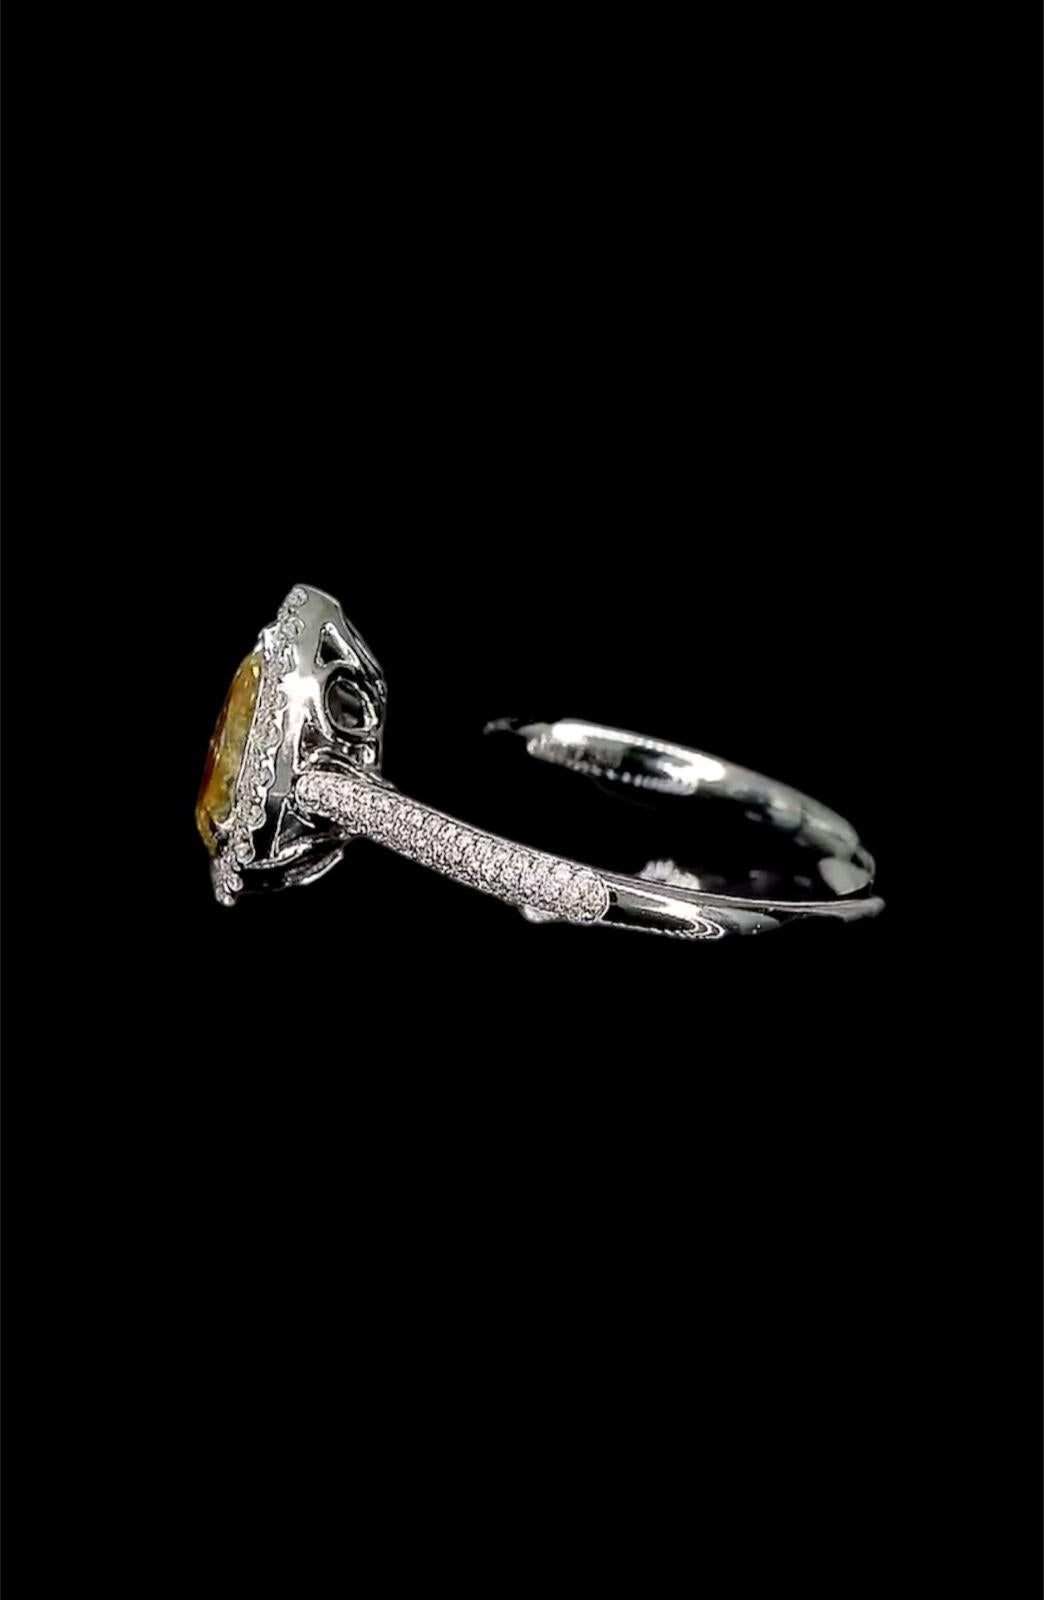 AGL Certified 1.01 Carat Fancy Yellow Diamond Ring VS Clarity For Sale 3